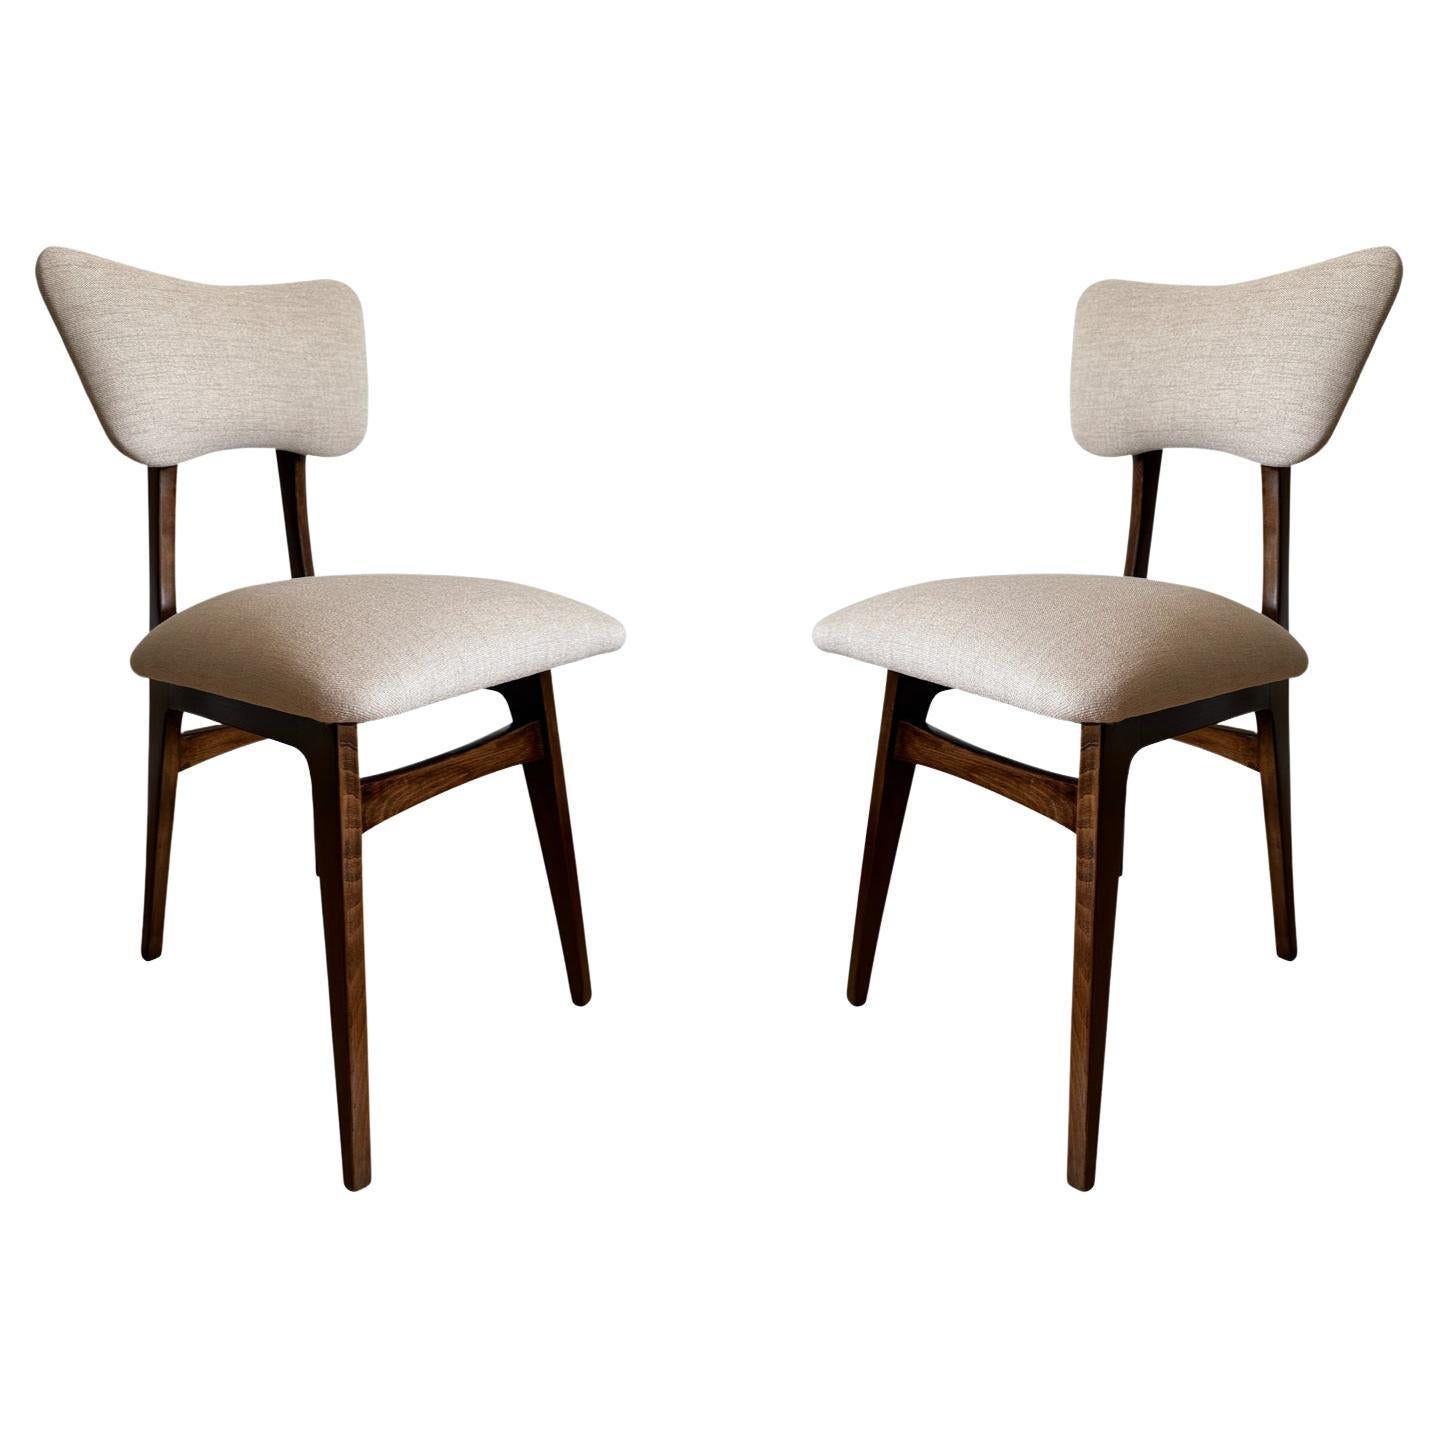 Set of Two Midcentury Beige Dining Chairs, Europe, 1960s